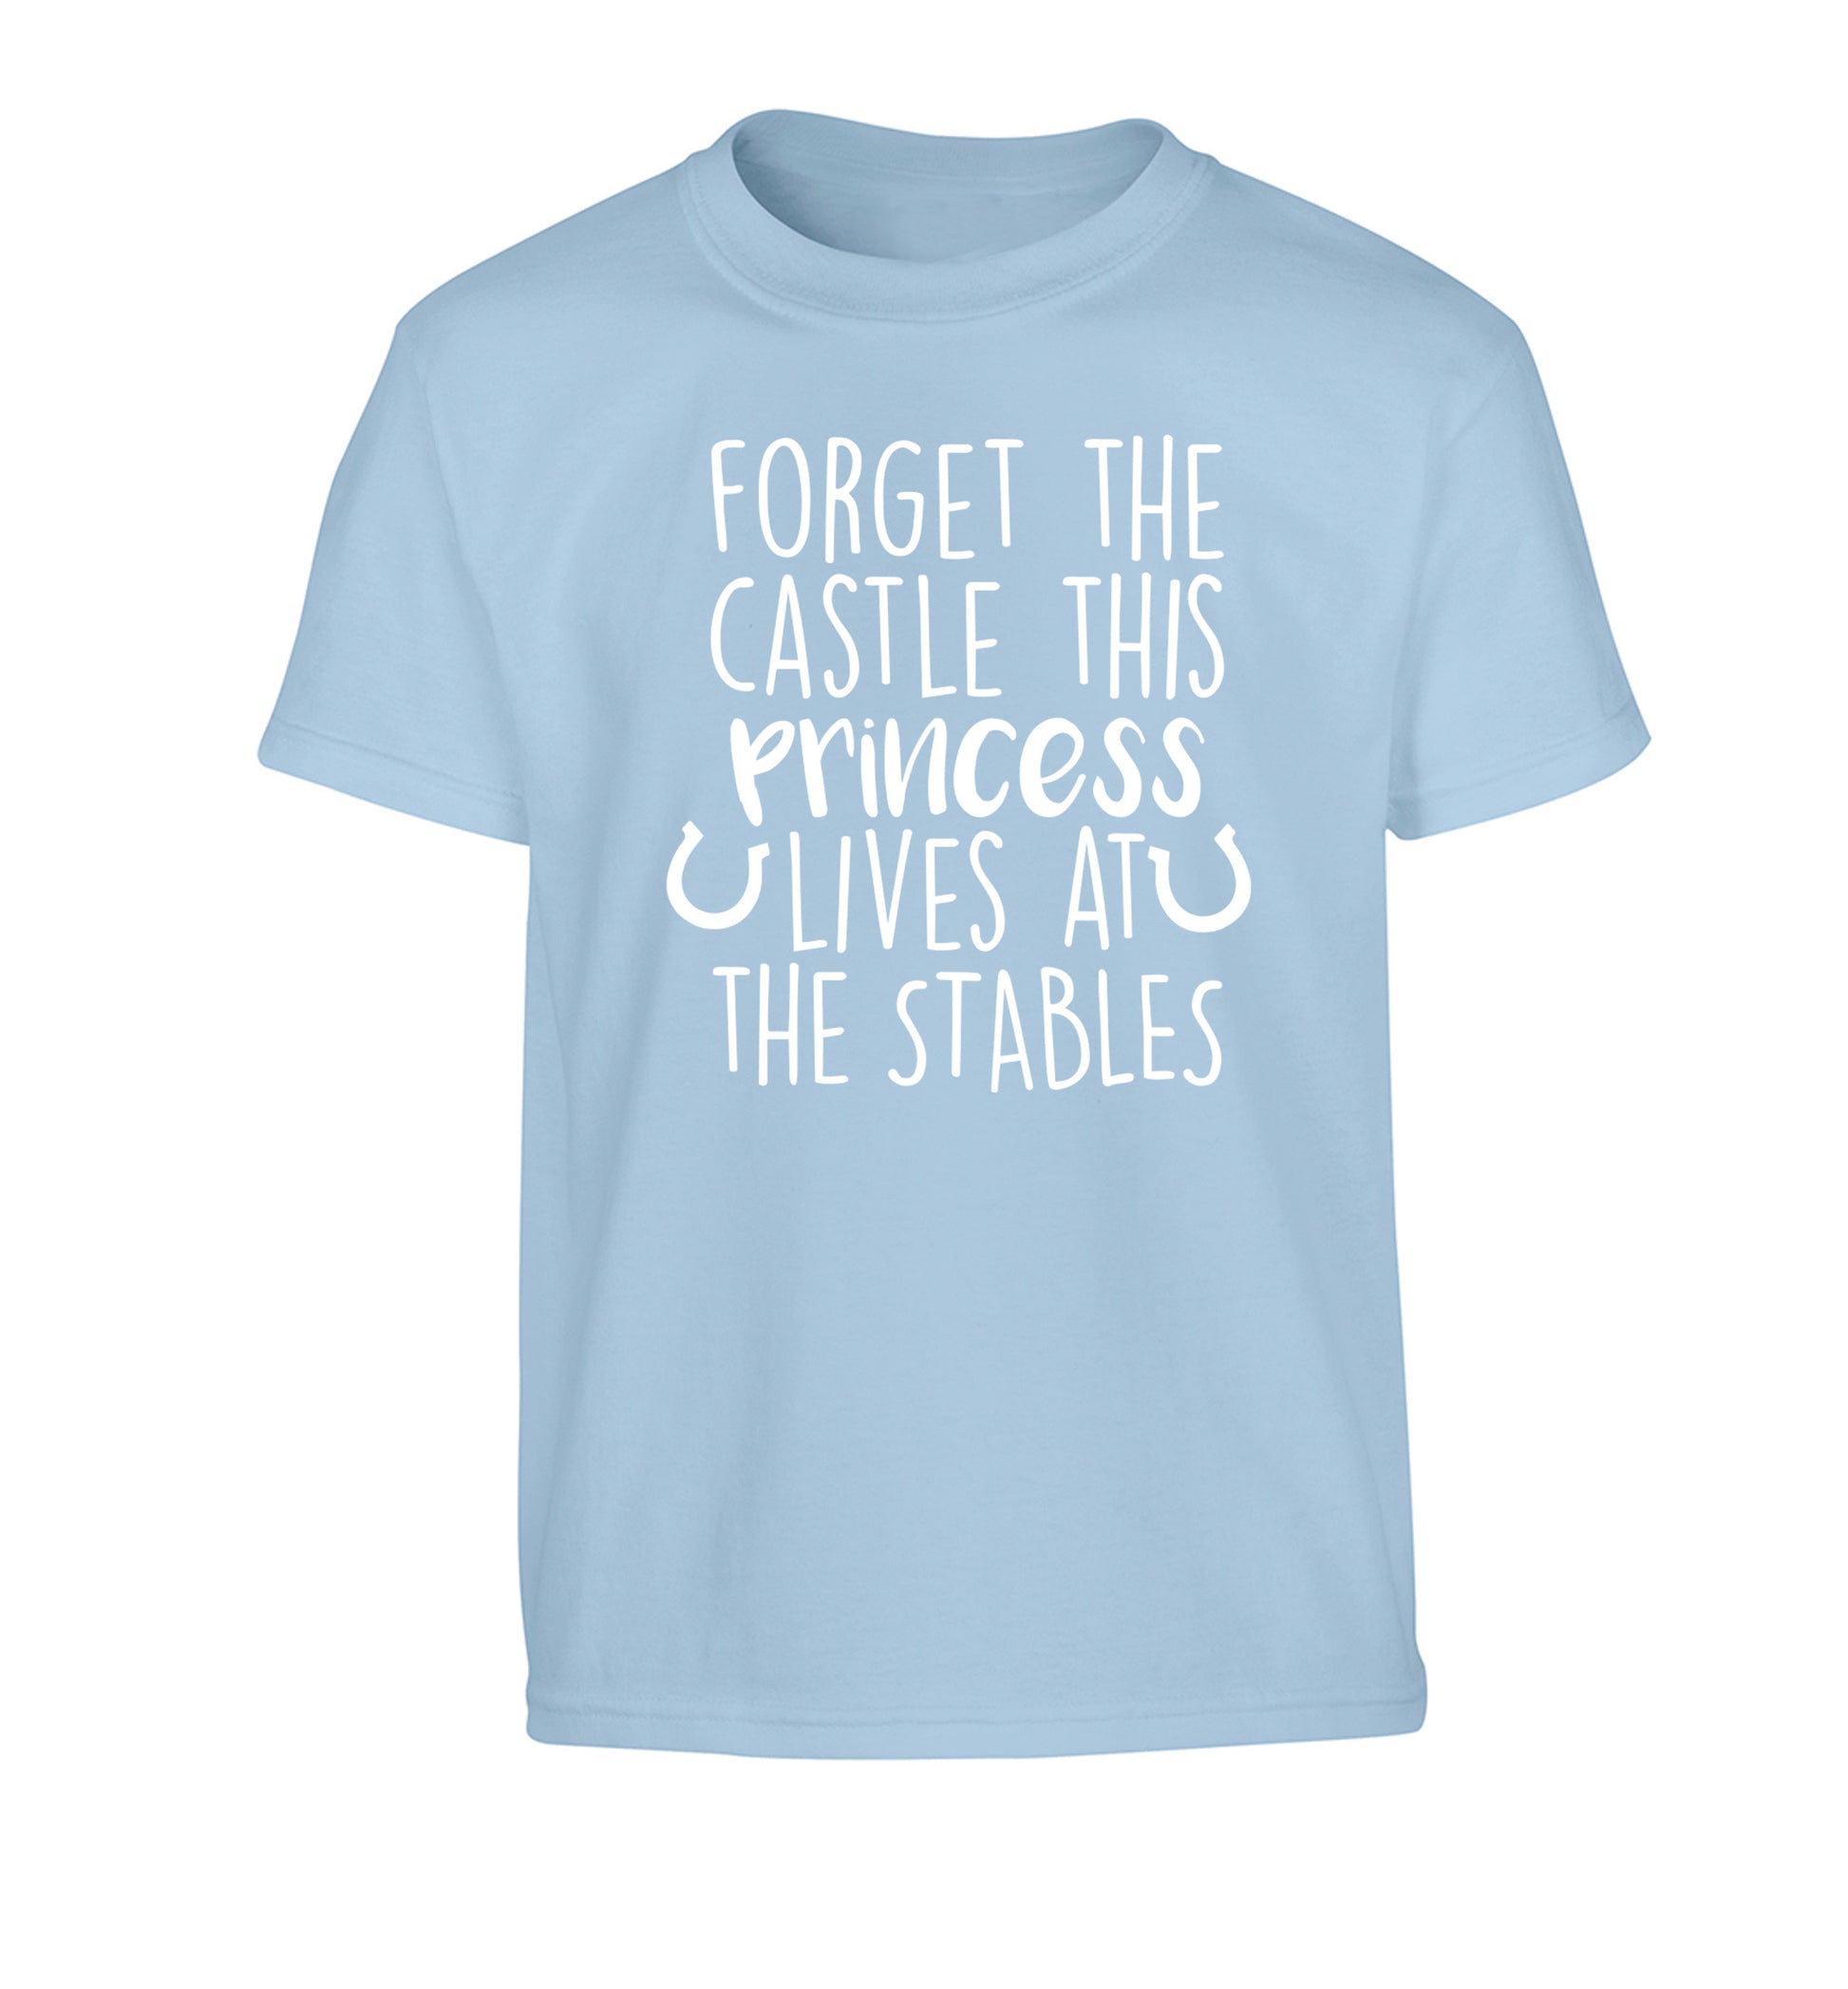 Forget the castle this princess lives at the stables Children's light blue Tshirt 12-14 Years